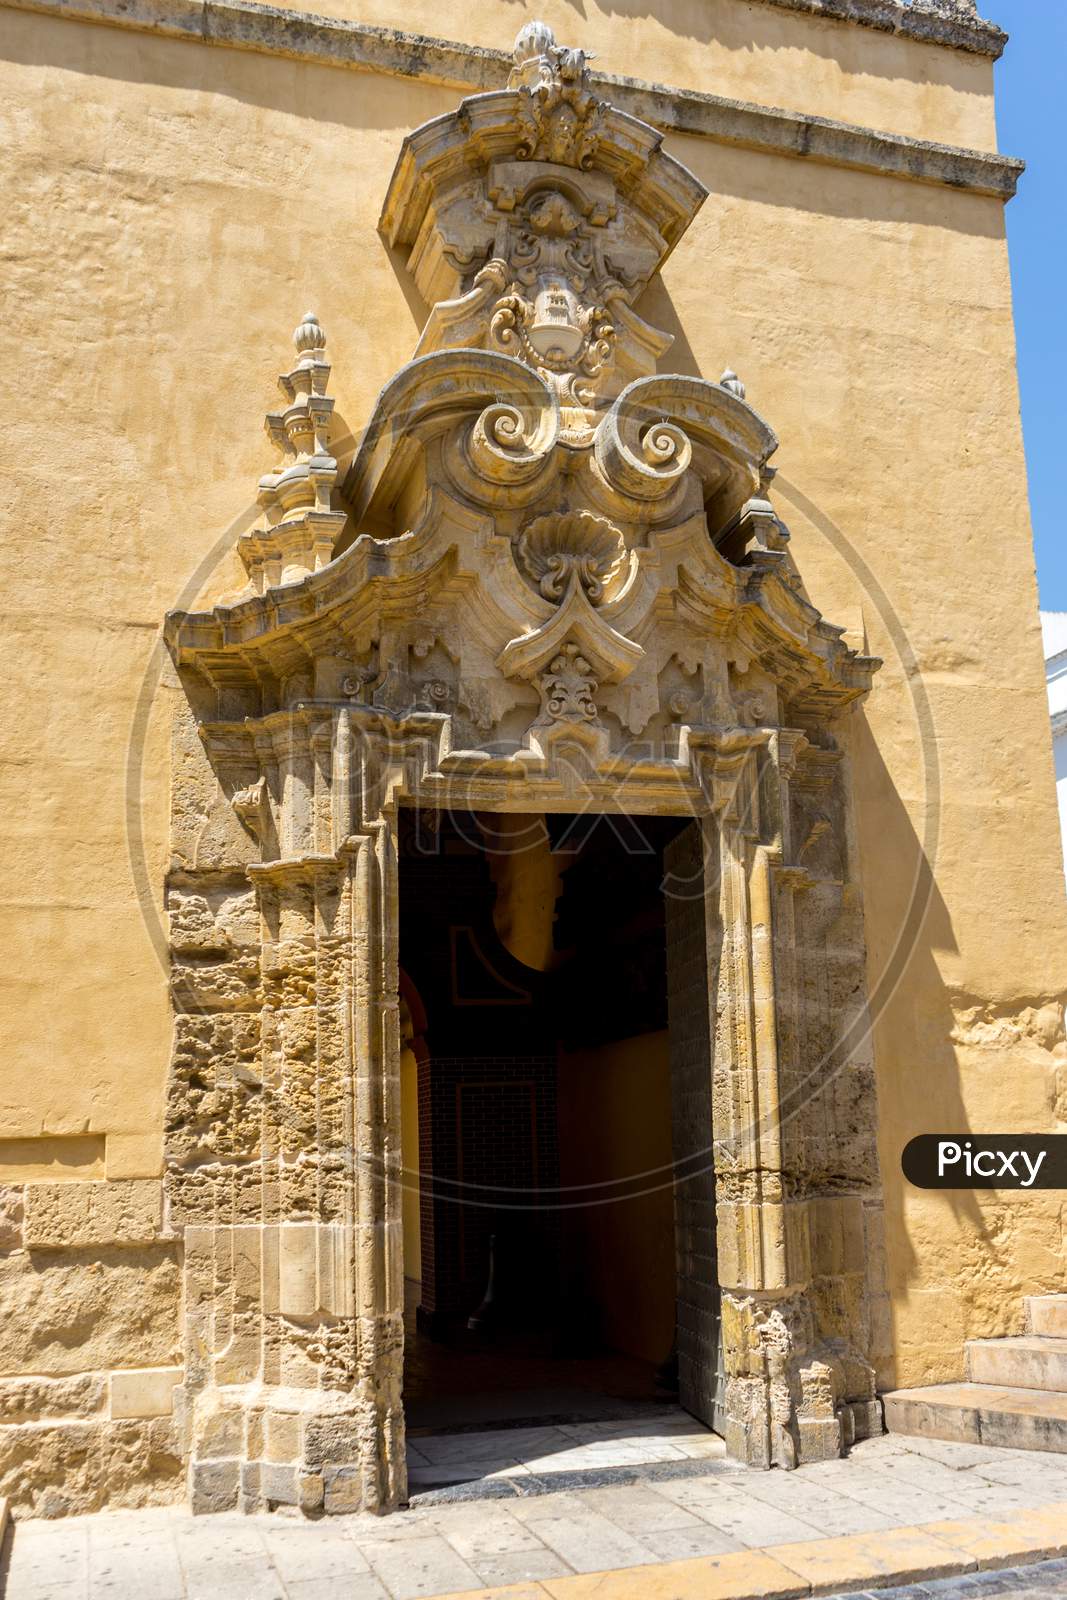 Spain, Cordoba, Low Angle View Of Statue Of Historic Building